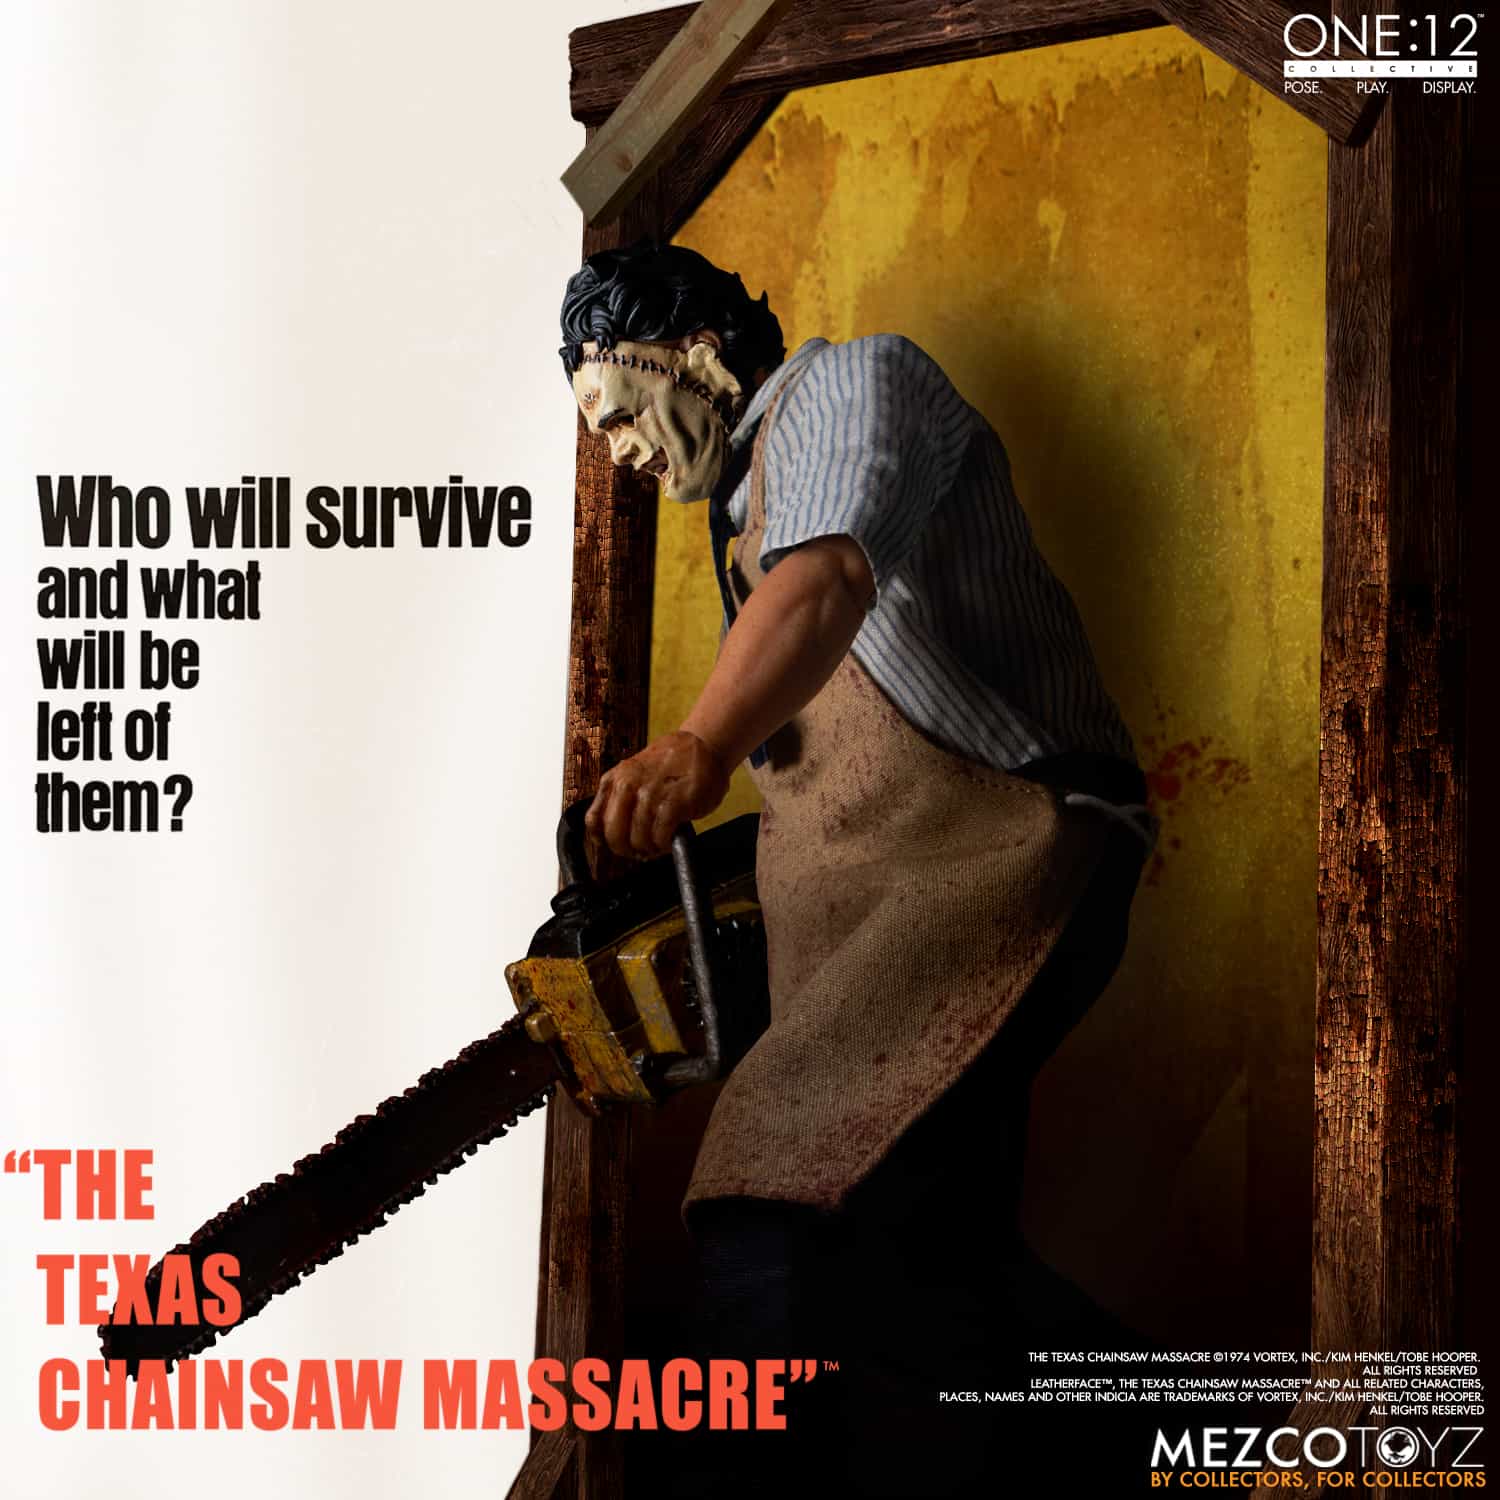 The One:12 Collective: The Texas Chainsaw Massacre - Deluxe Leatherface